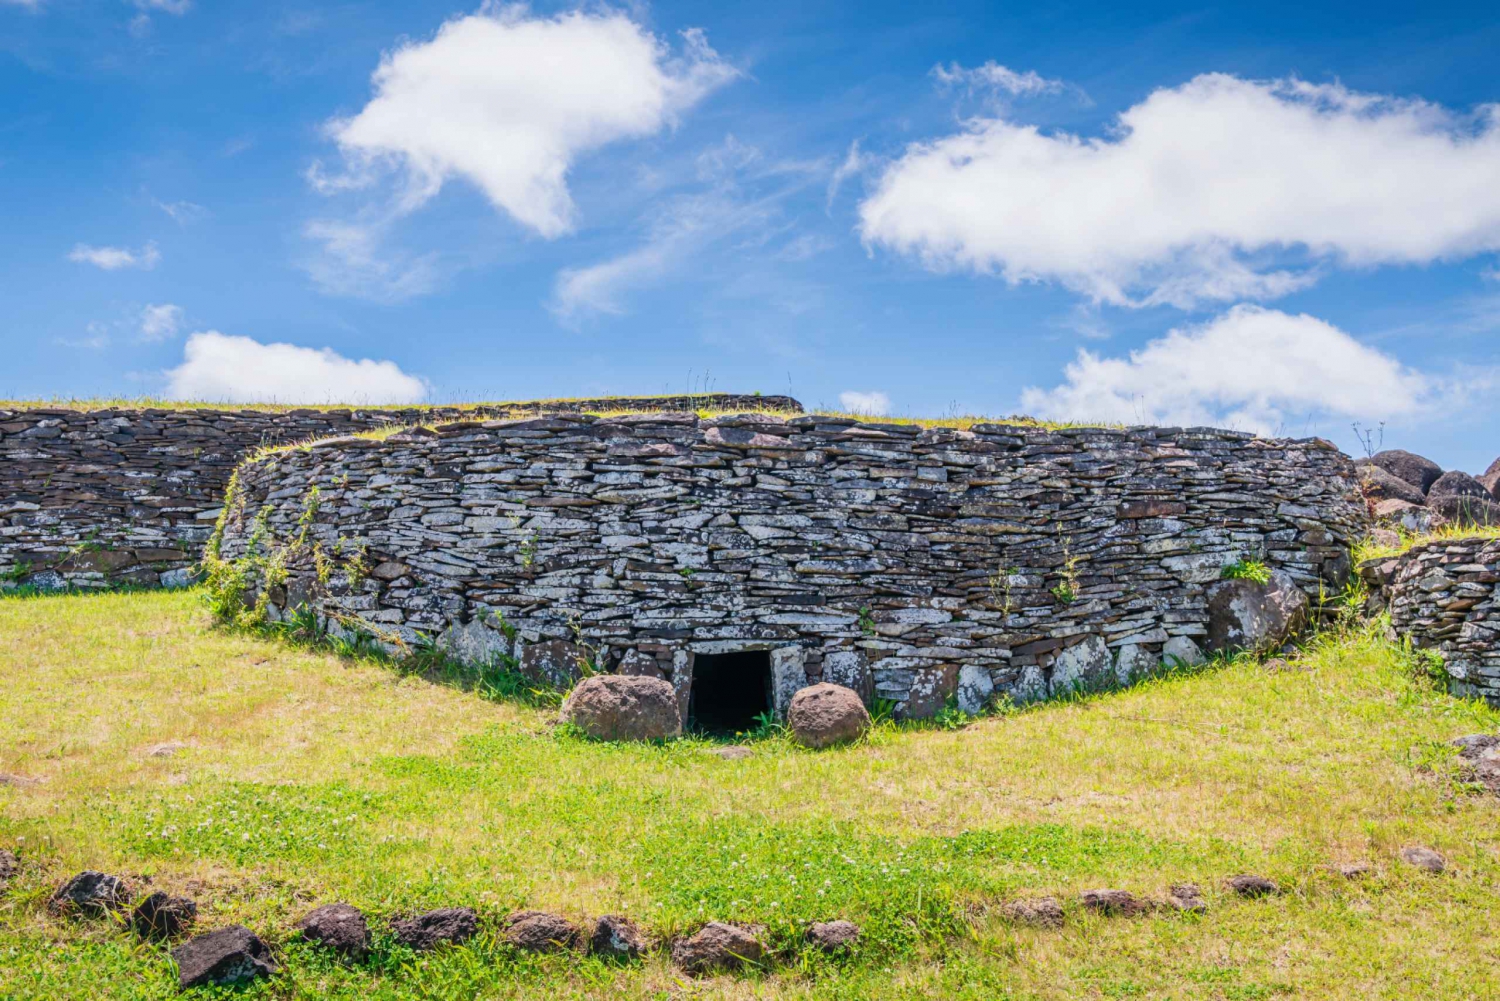 Easter Island: Ancestral Caves and Orongo Last Village